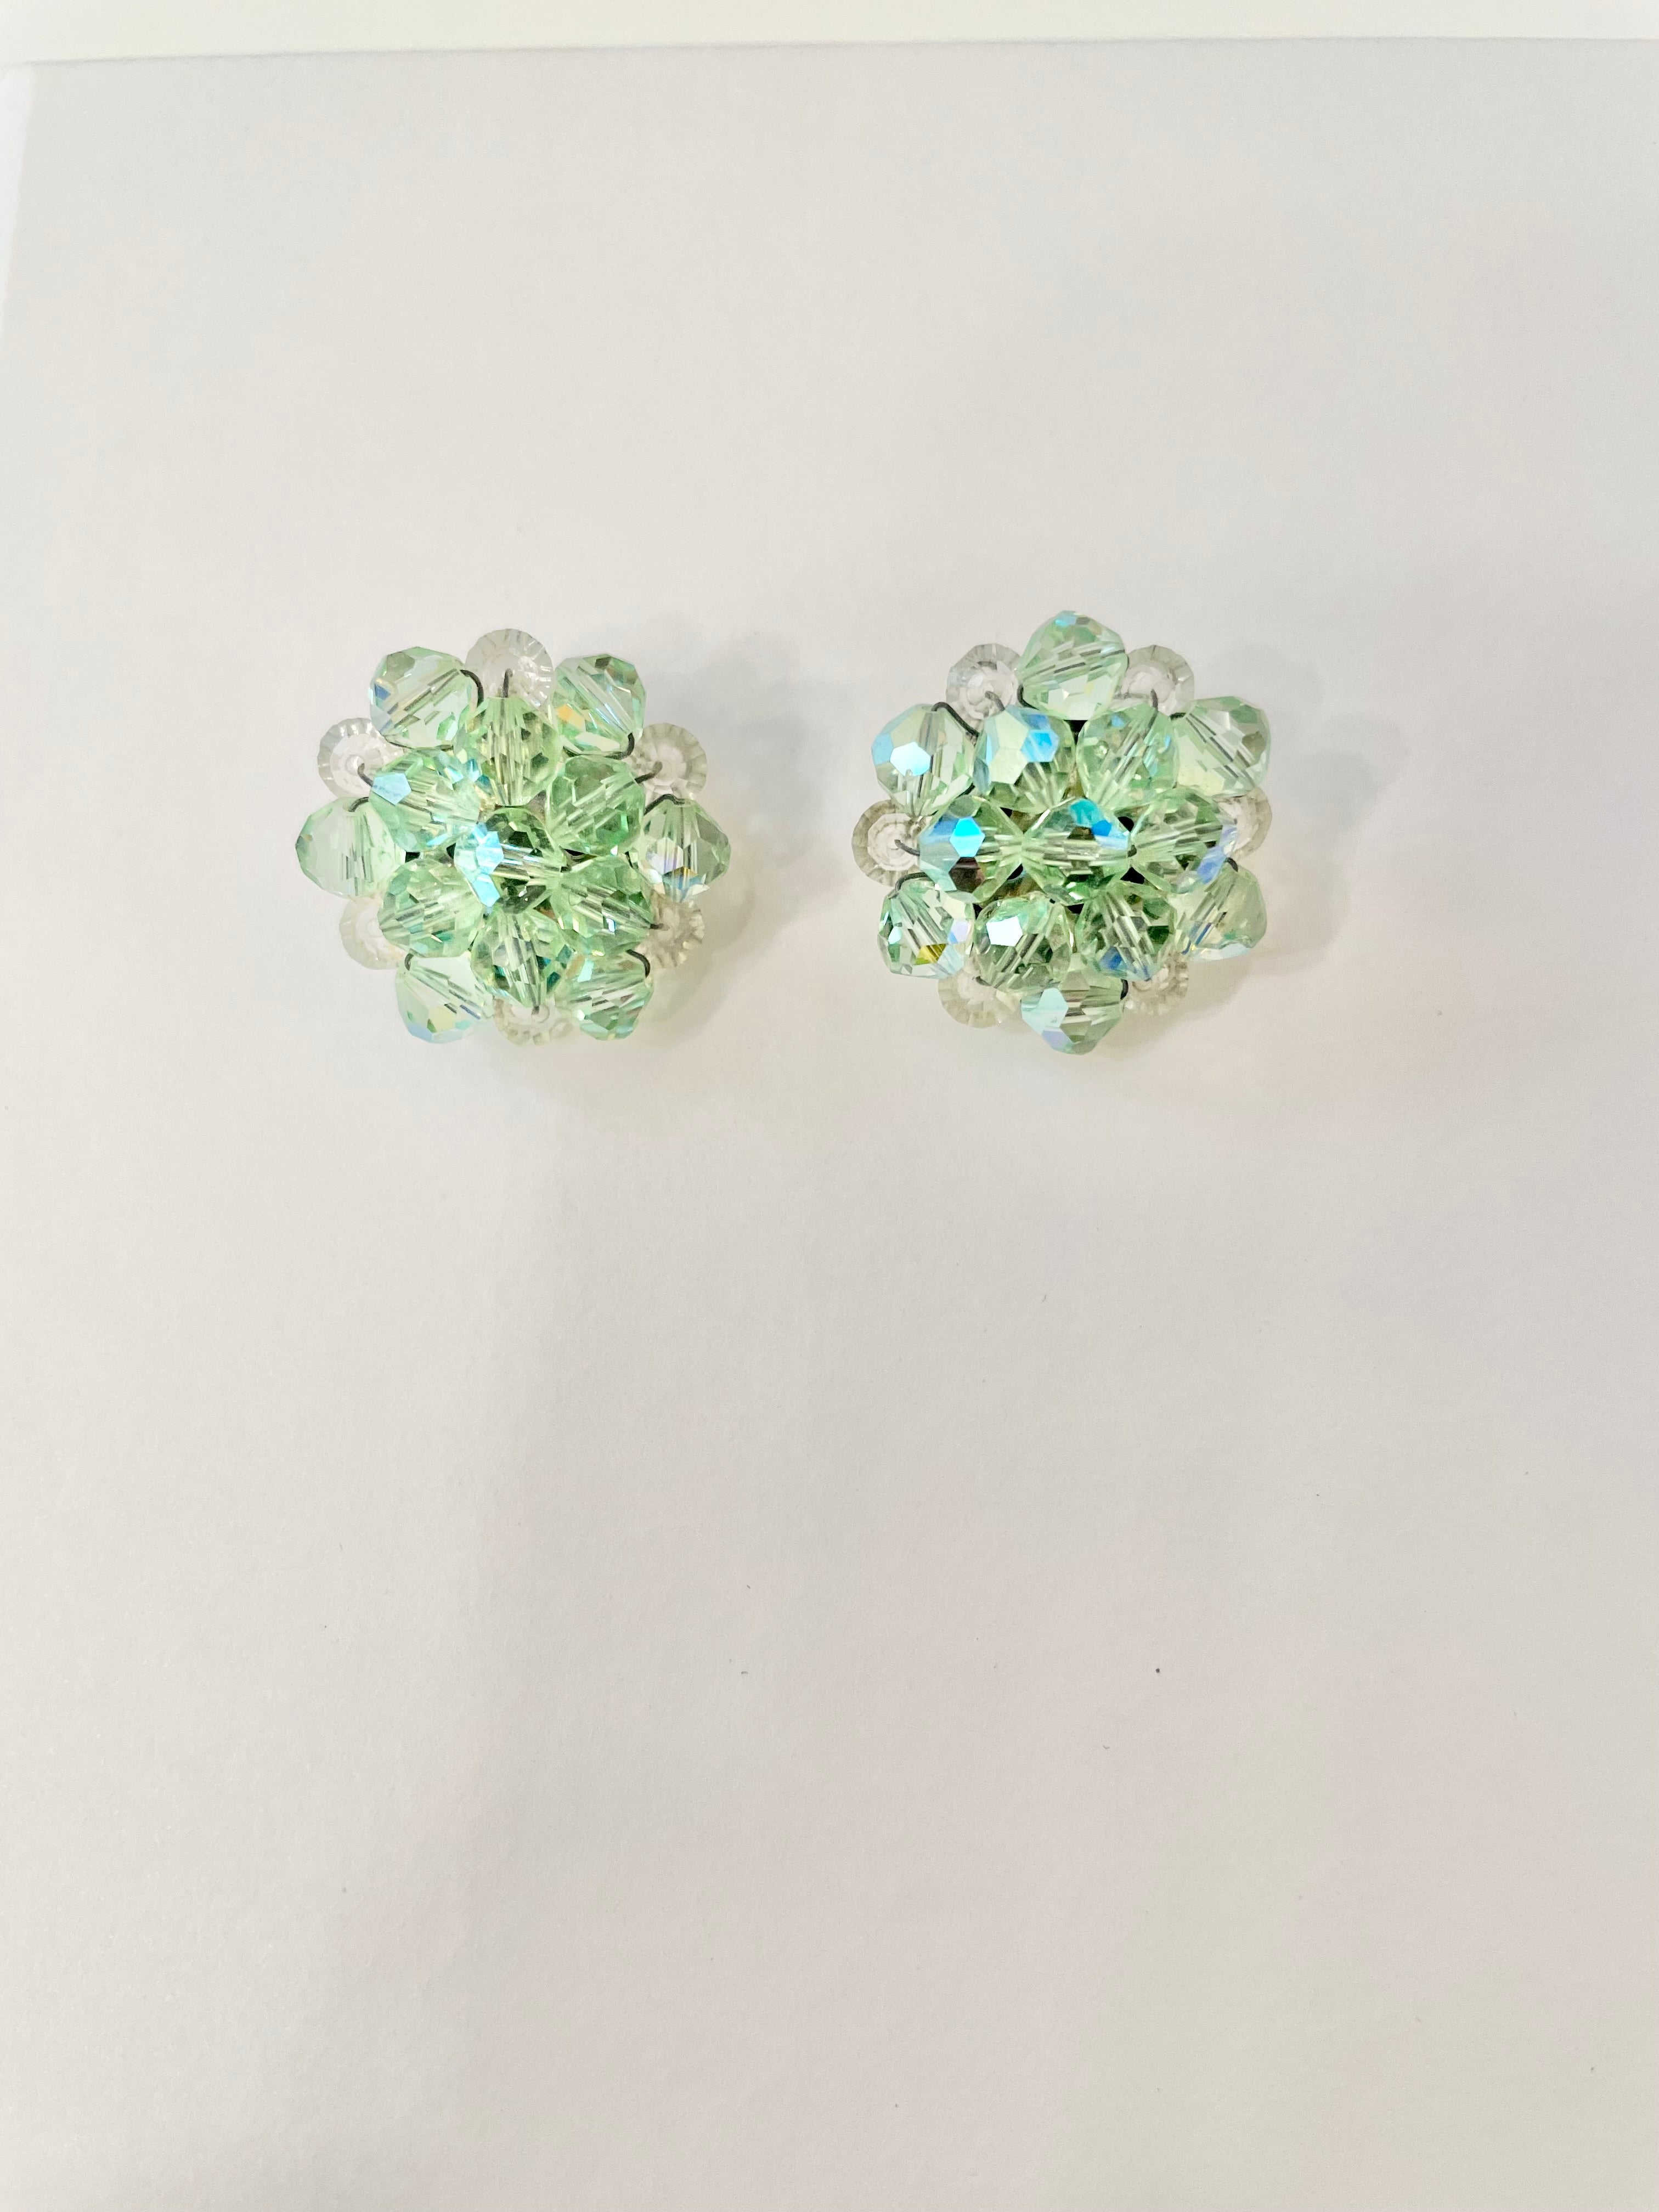 1960's soft minty green Austrian crystal button earrings... so feminine, and timeless!